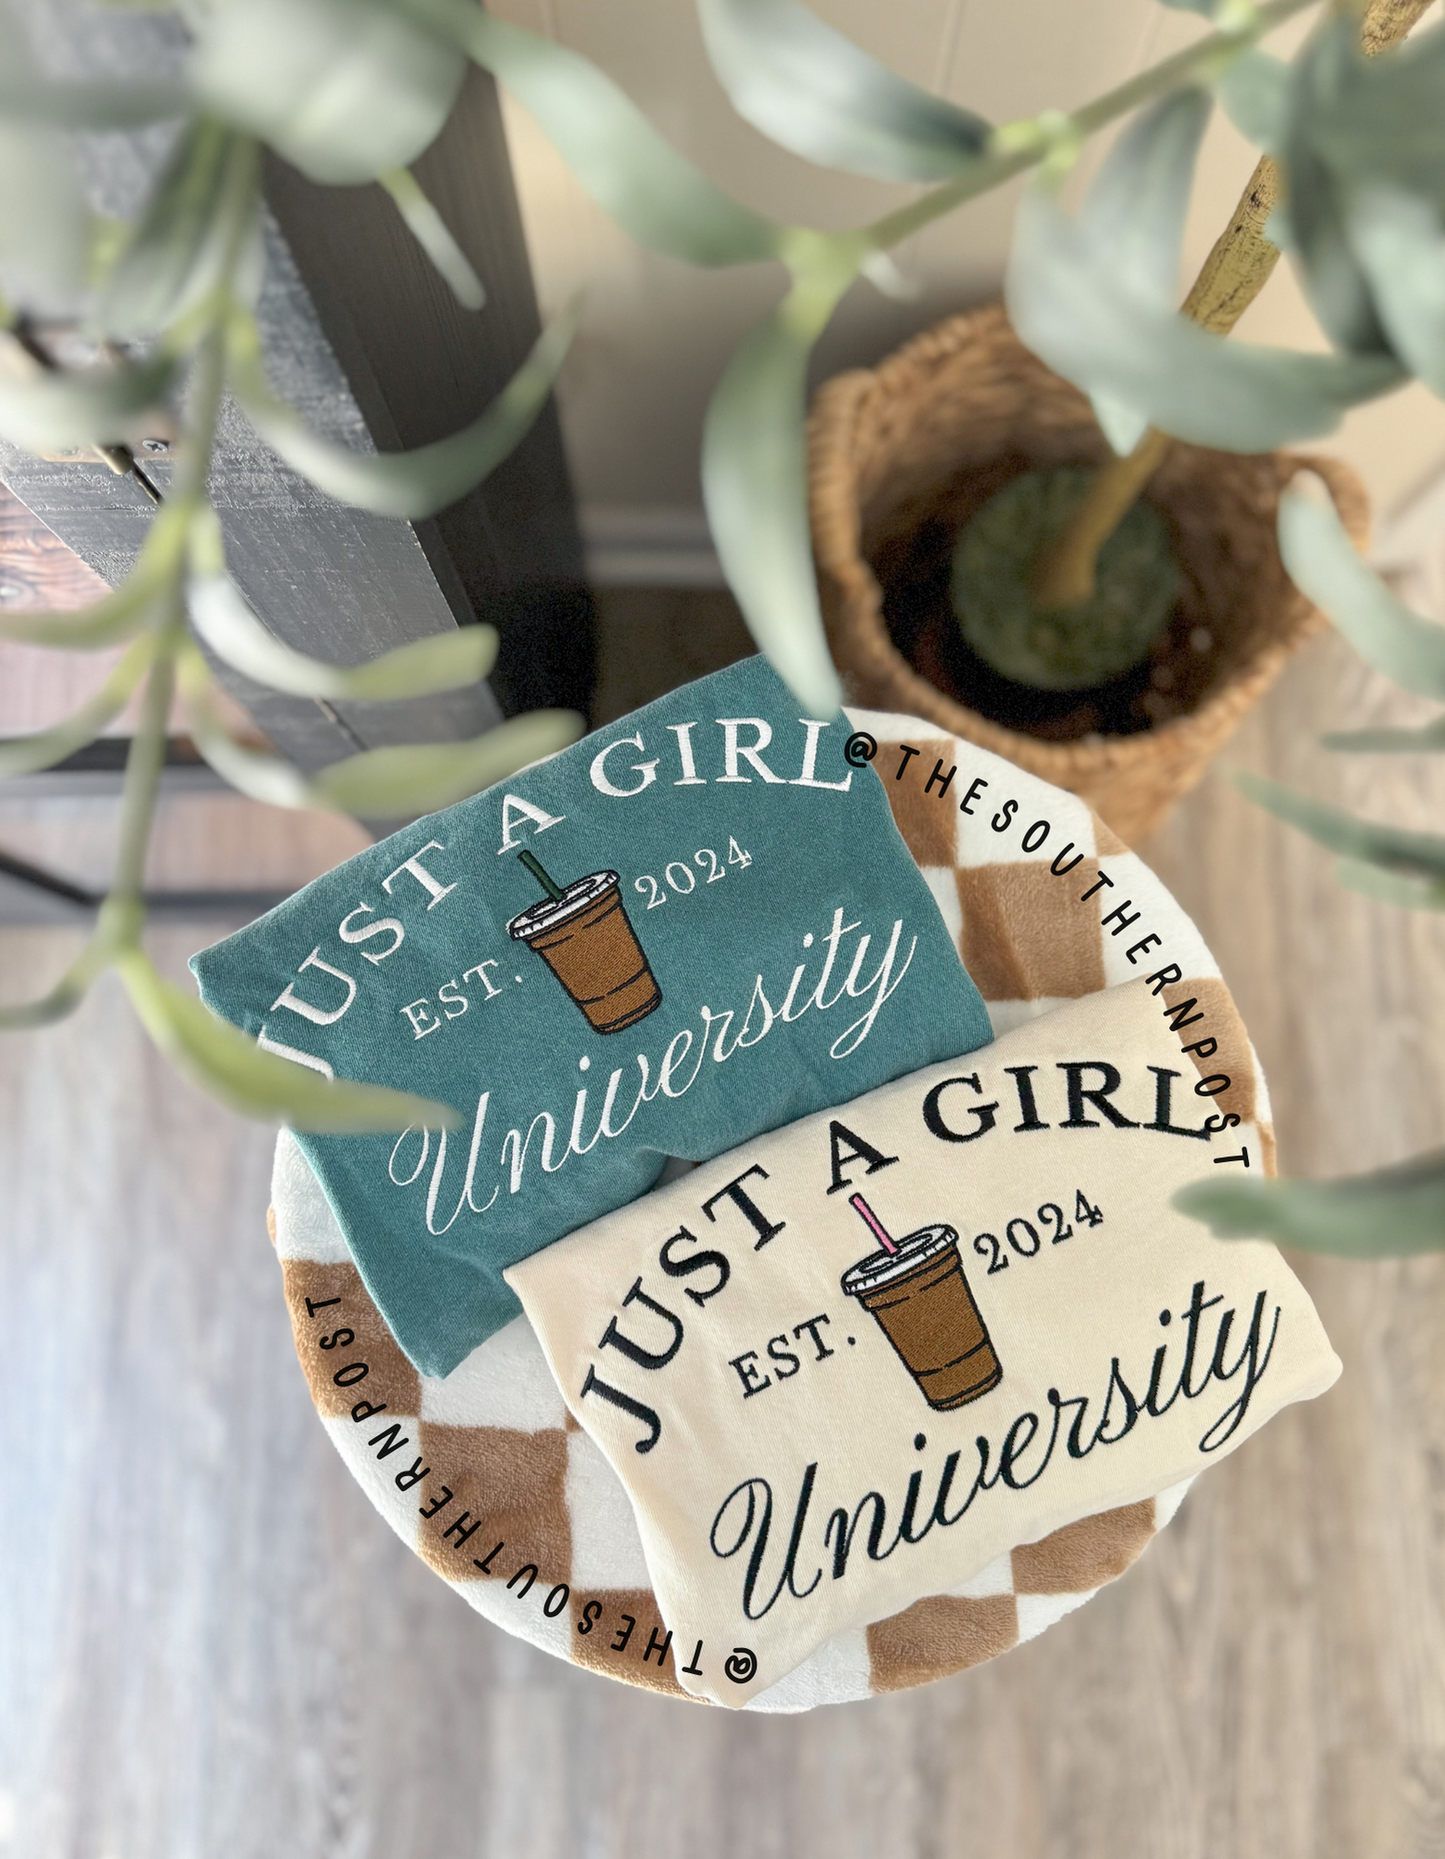 Just A Girl University Shirt -- Embroidered Crewneck, Iced Coffee, Cozy Tee or Pullover